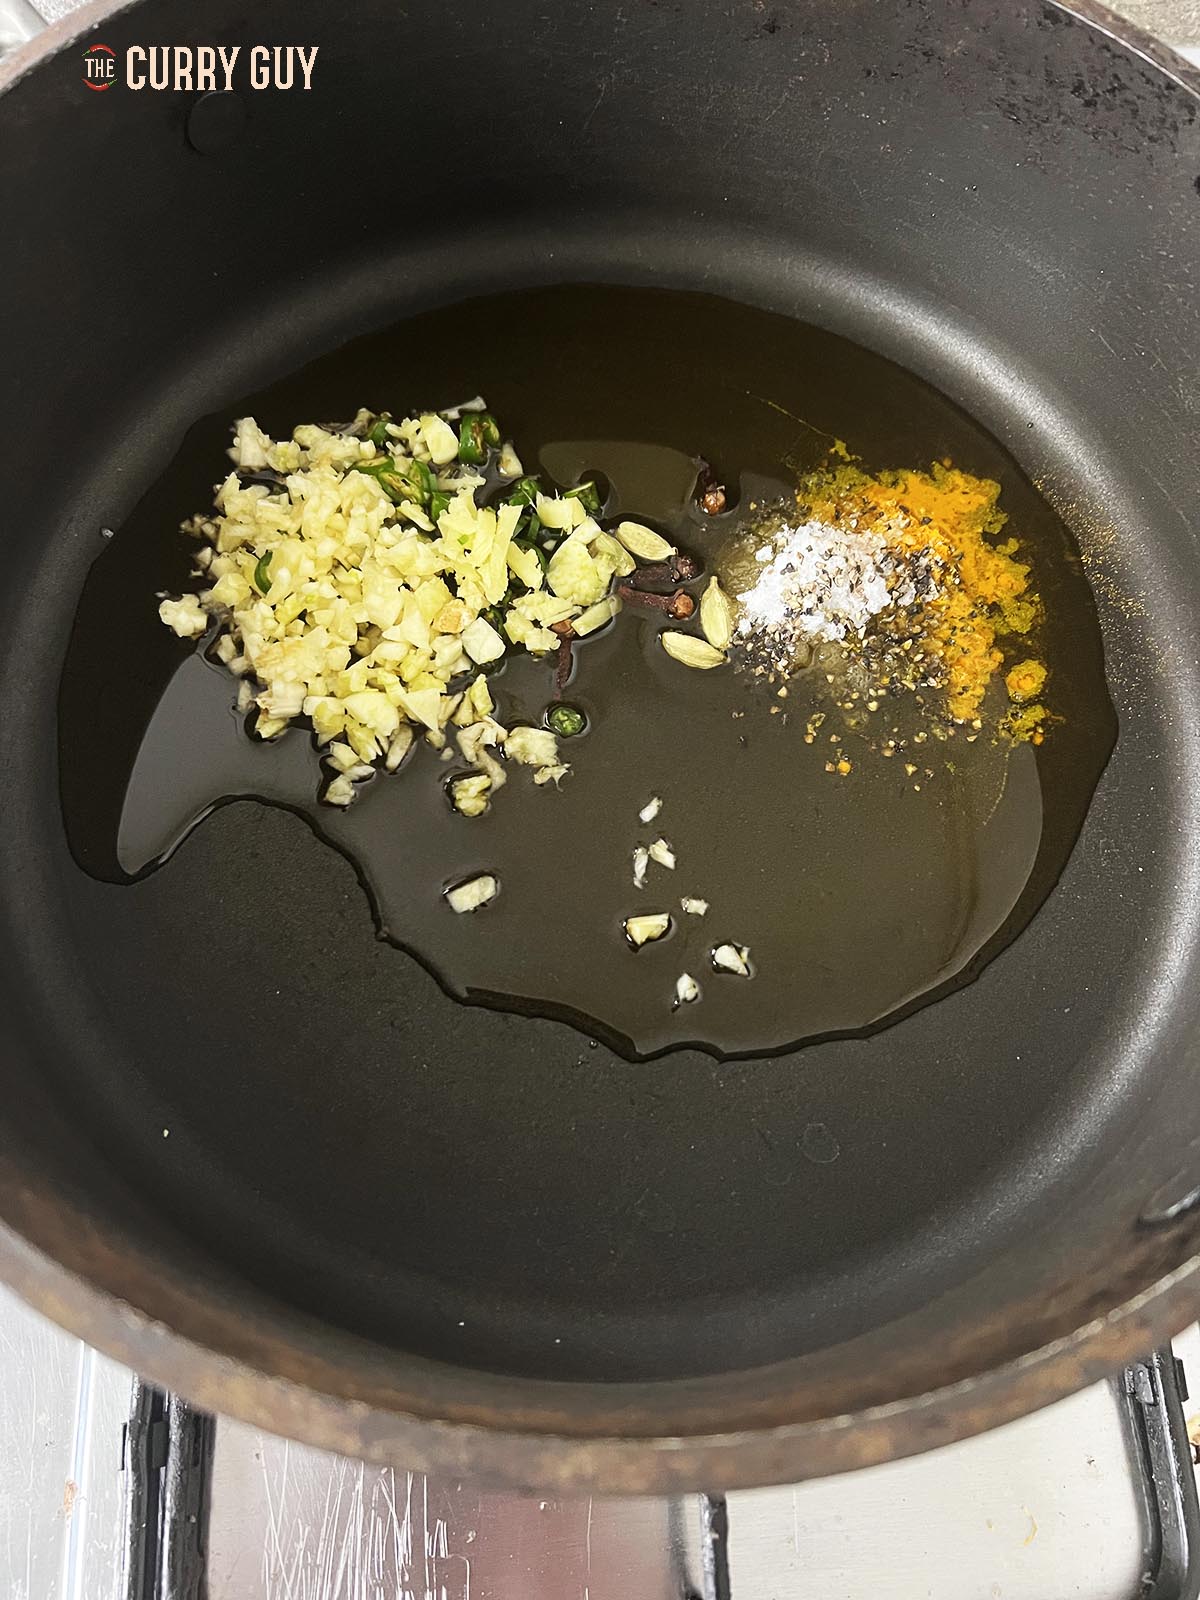 The oil heating in the pan with the garlic, cardamom, cloves, salt, sugar and ground turmeric.